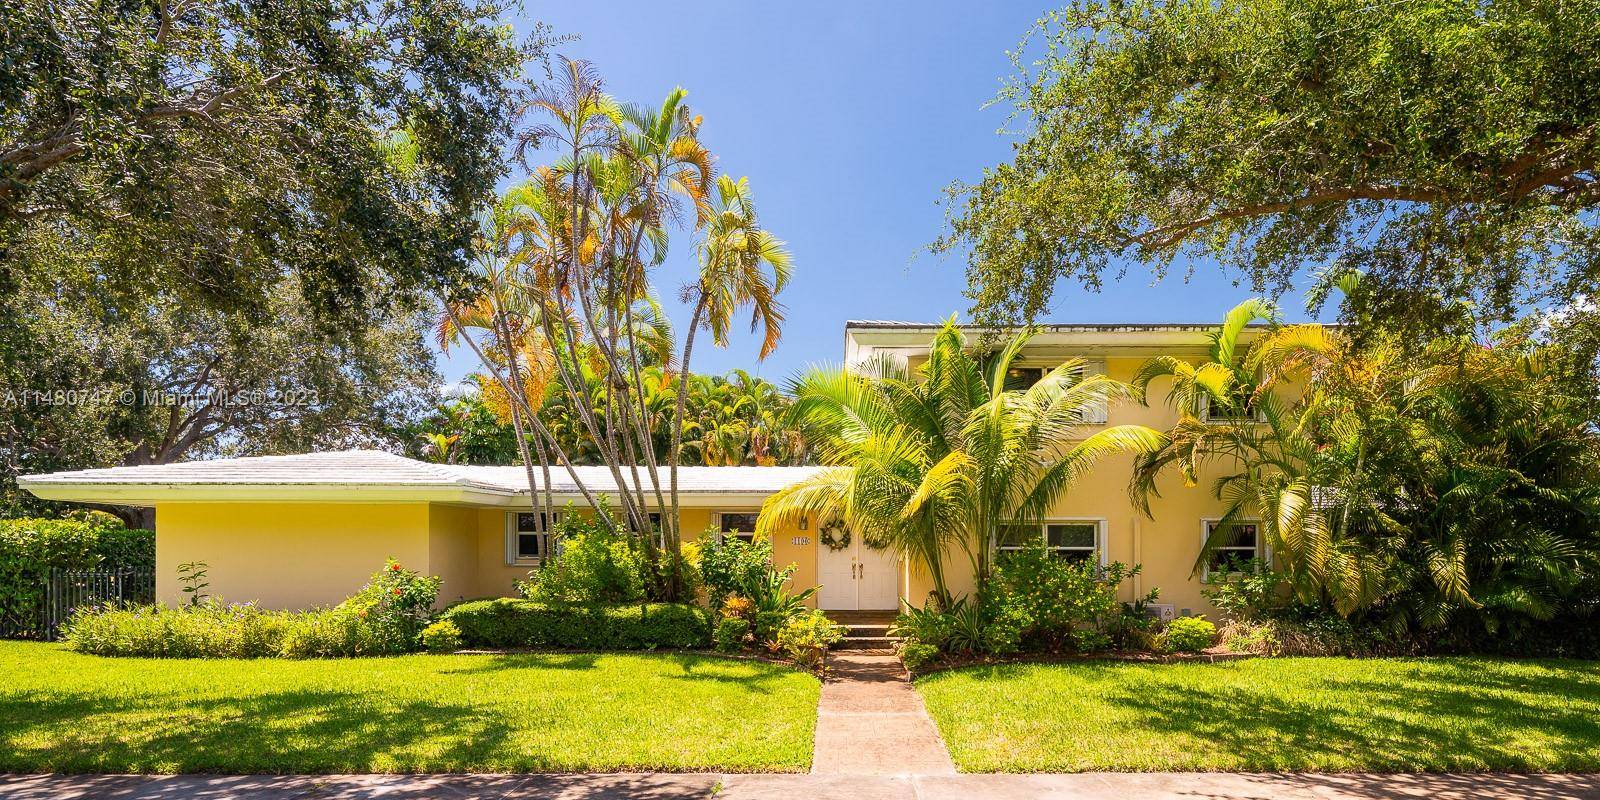 Fall in love with this standout home in coveted east Miami Shores, a short walk to the famed Miami Shores Country Club and historic 18 hole golf course.